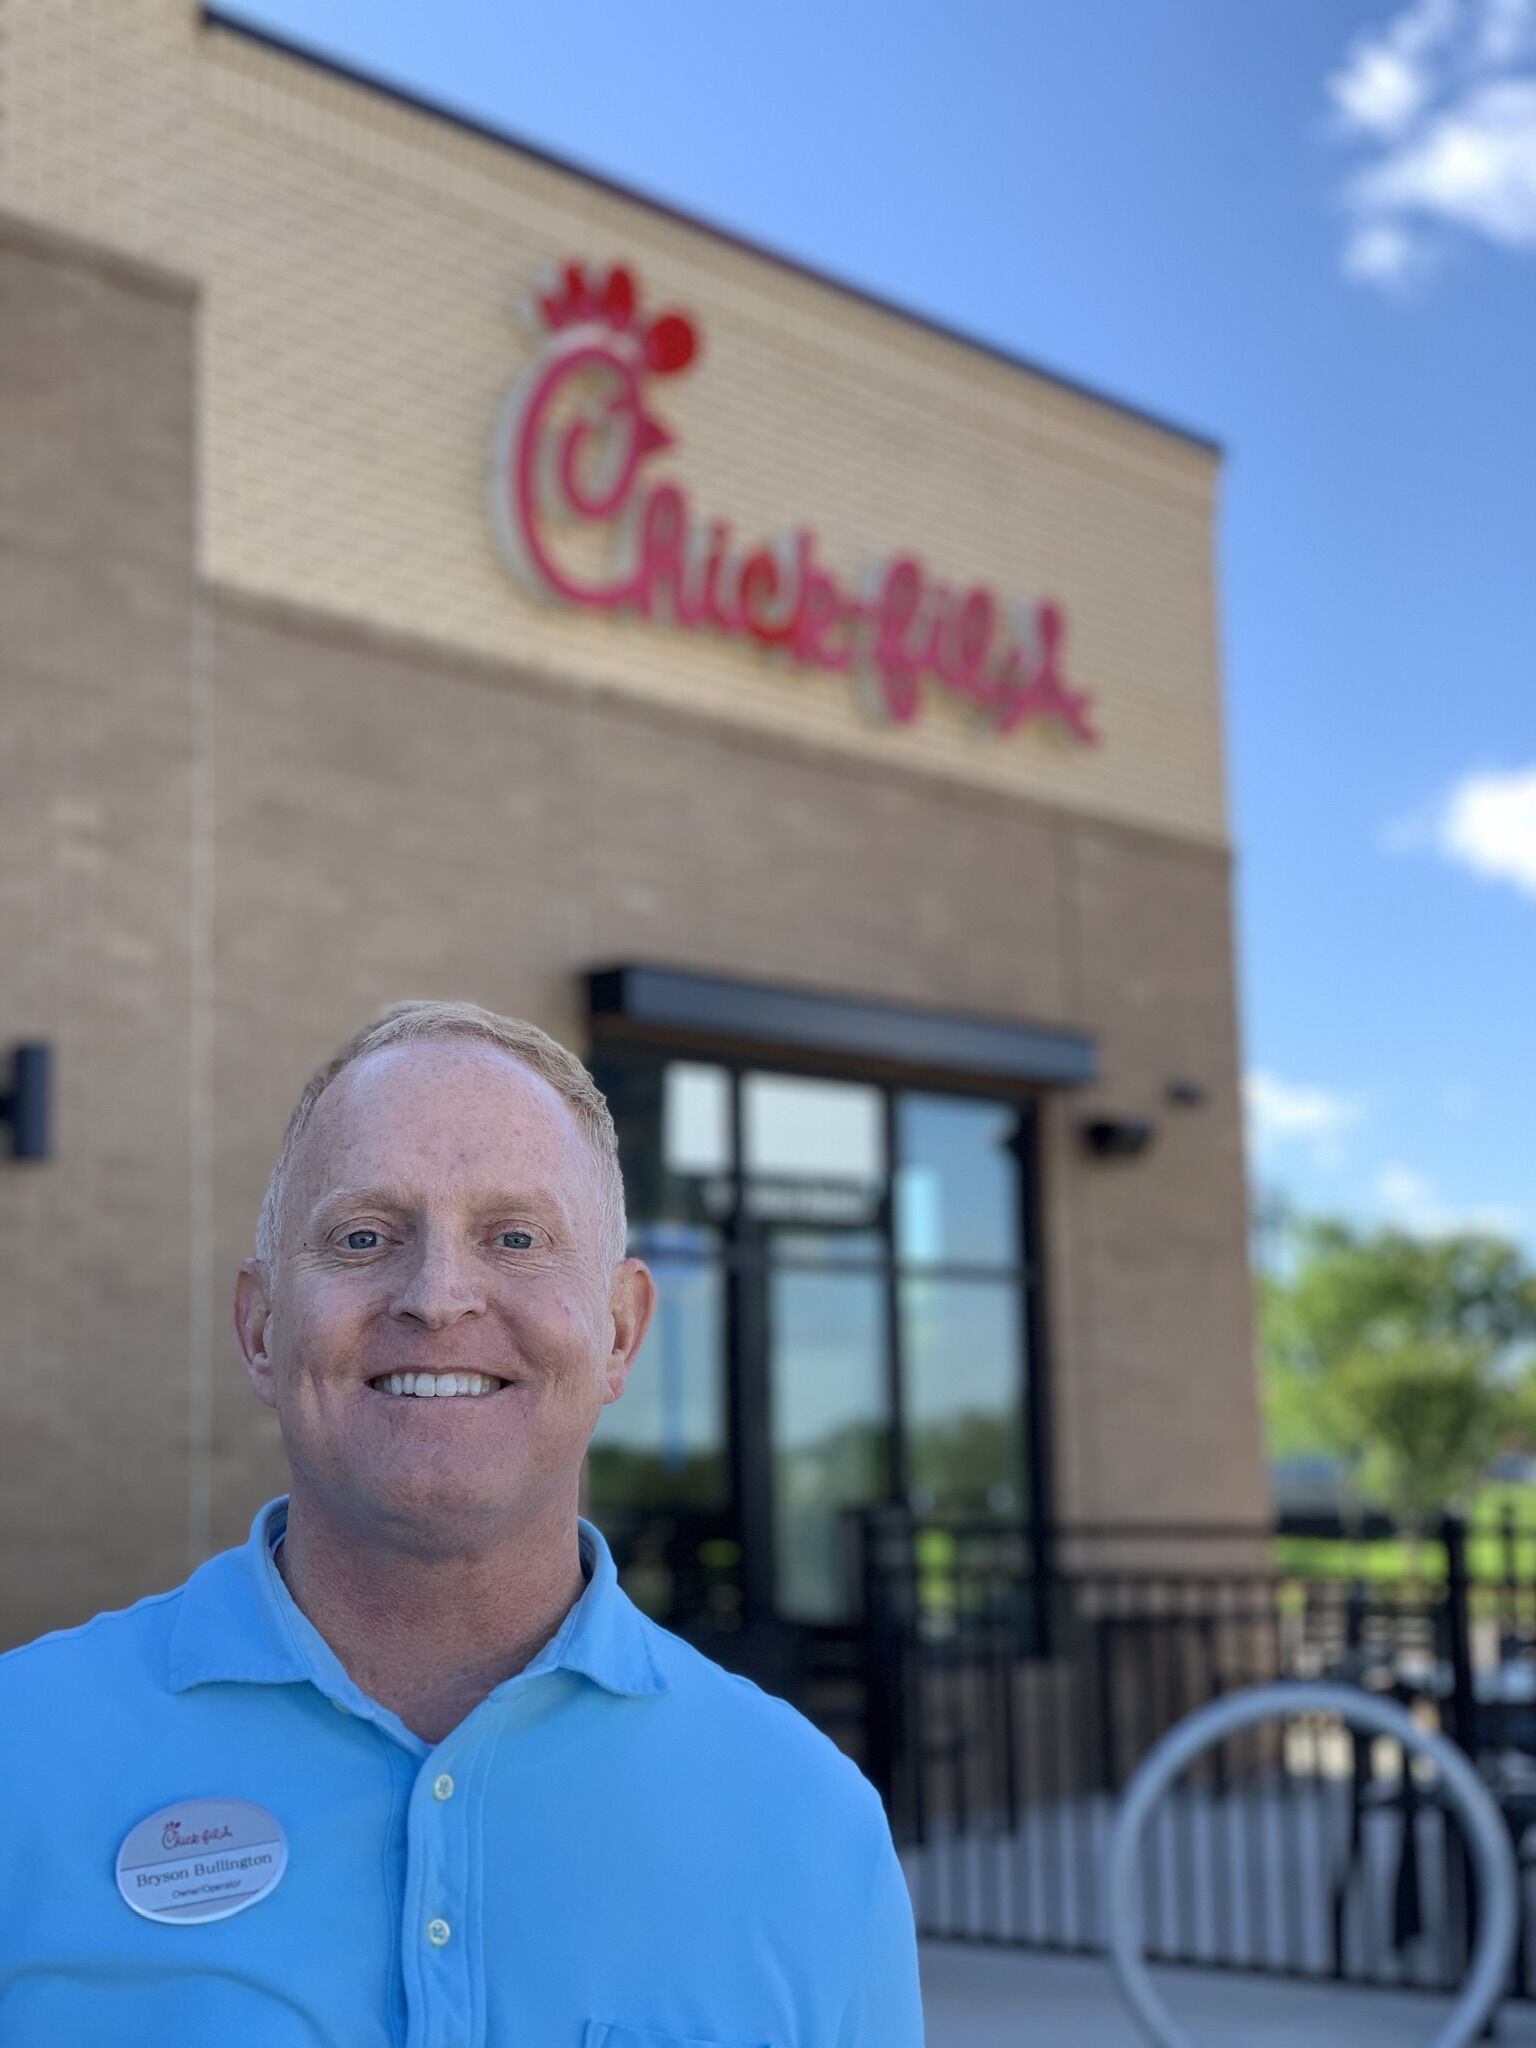 Community Invited to Celebrate Chick-fil-A Opening in Sulphur Springs on May 2nd. Up to 100 guests to earn free year of Chick-fil-A meals by participating in 12-hour First 100 Campout